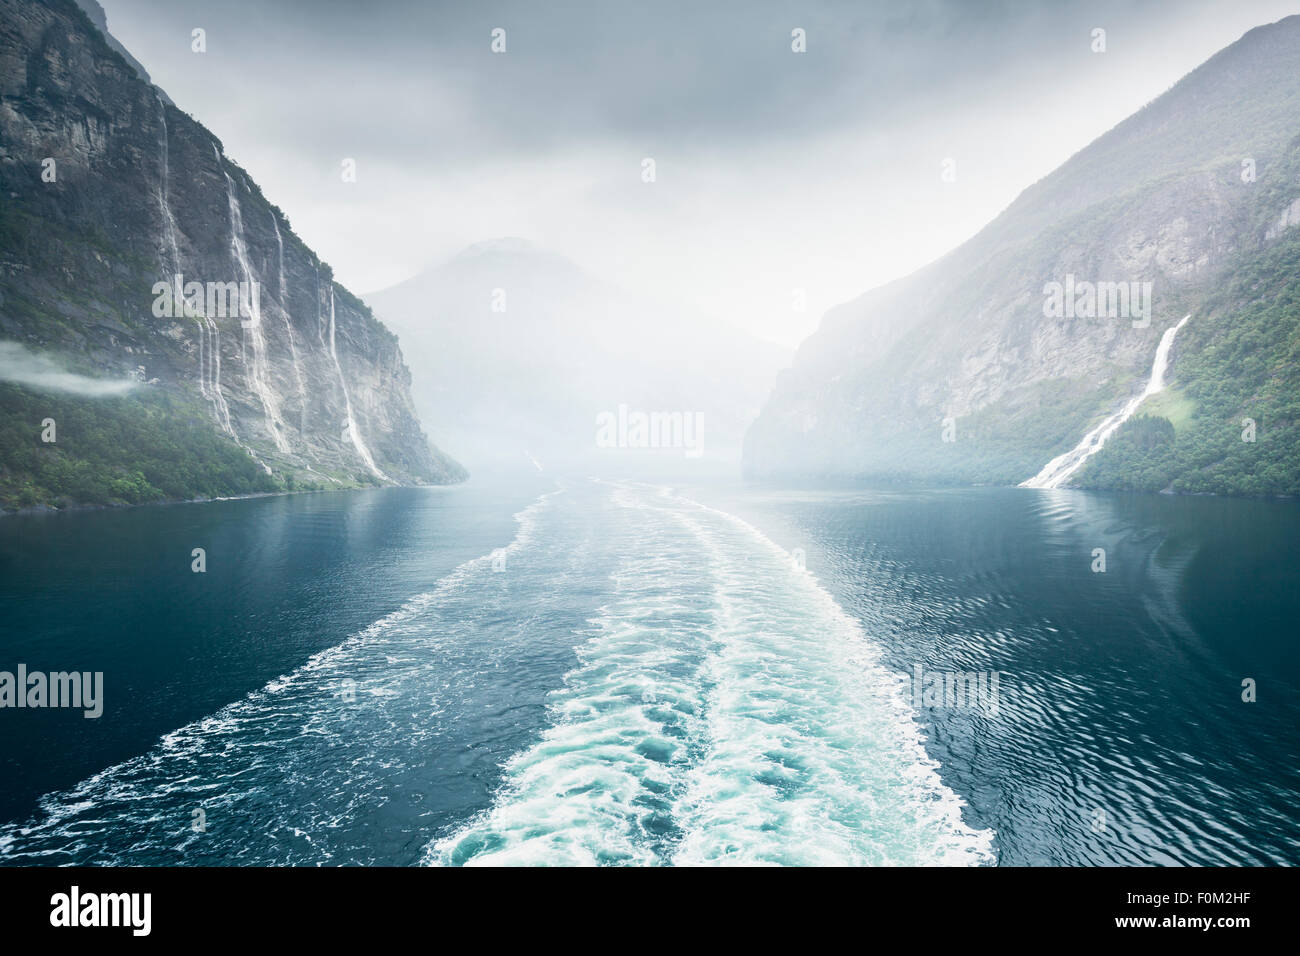 Boat in the Geirangerfjord at the waterfall 'The Seven Sisters', Norway Stock Photo